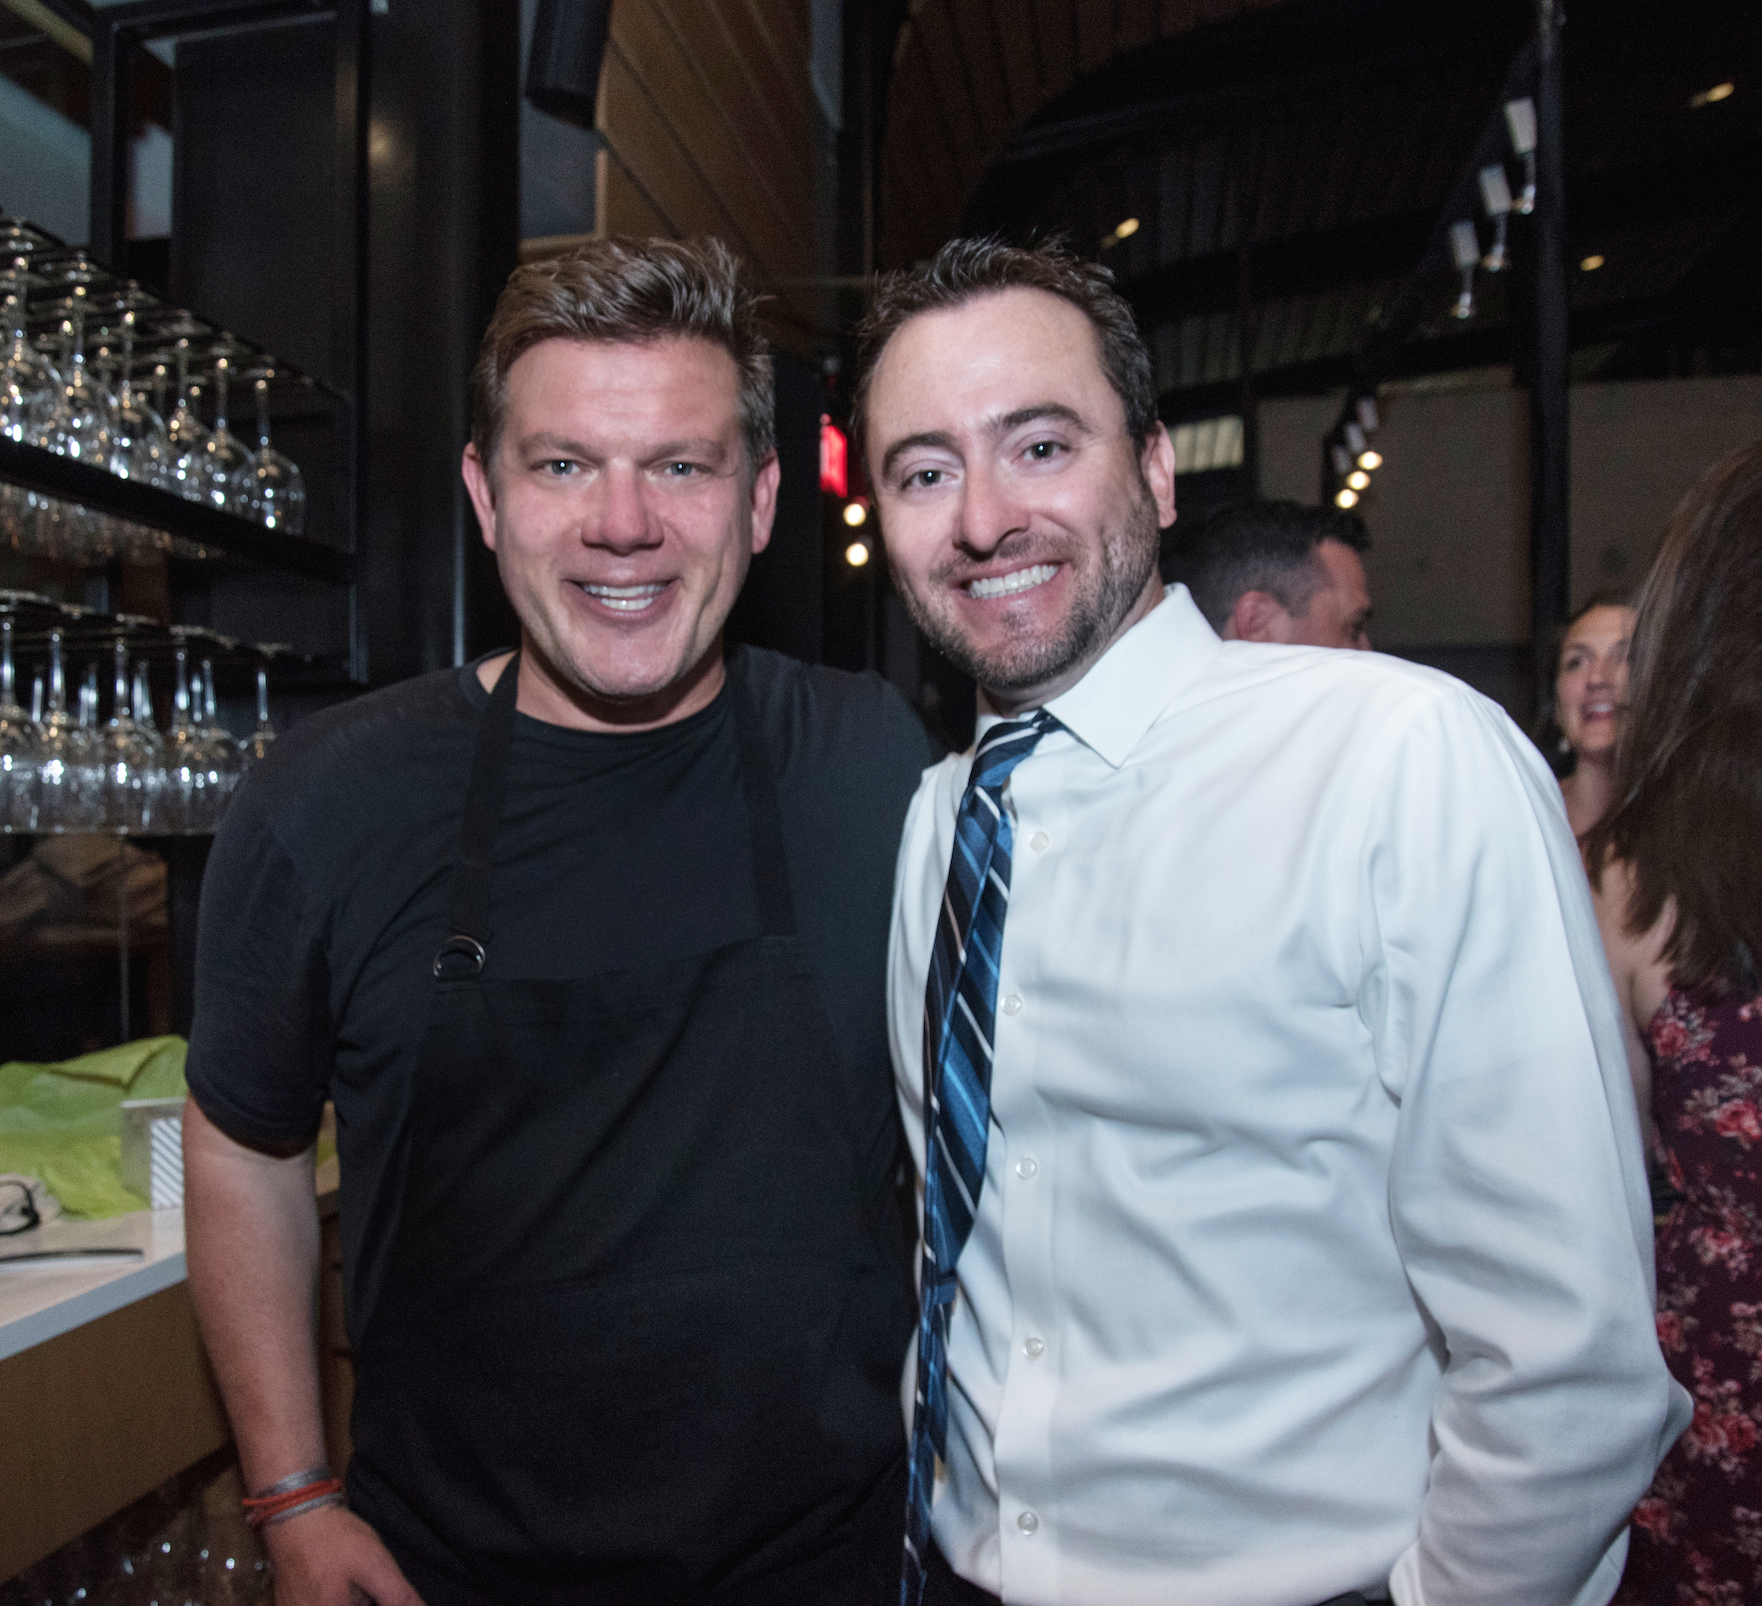 Chef Tyler Florence and Cooper's Hawk Founder & CEO Tim McEnery celebrate the launch of their collaboration wine at a Wine Club member dinner in Naples Florida.